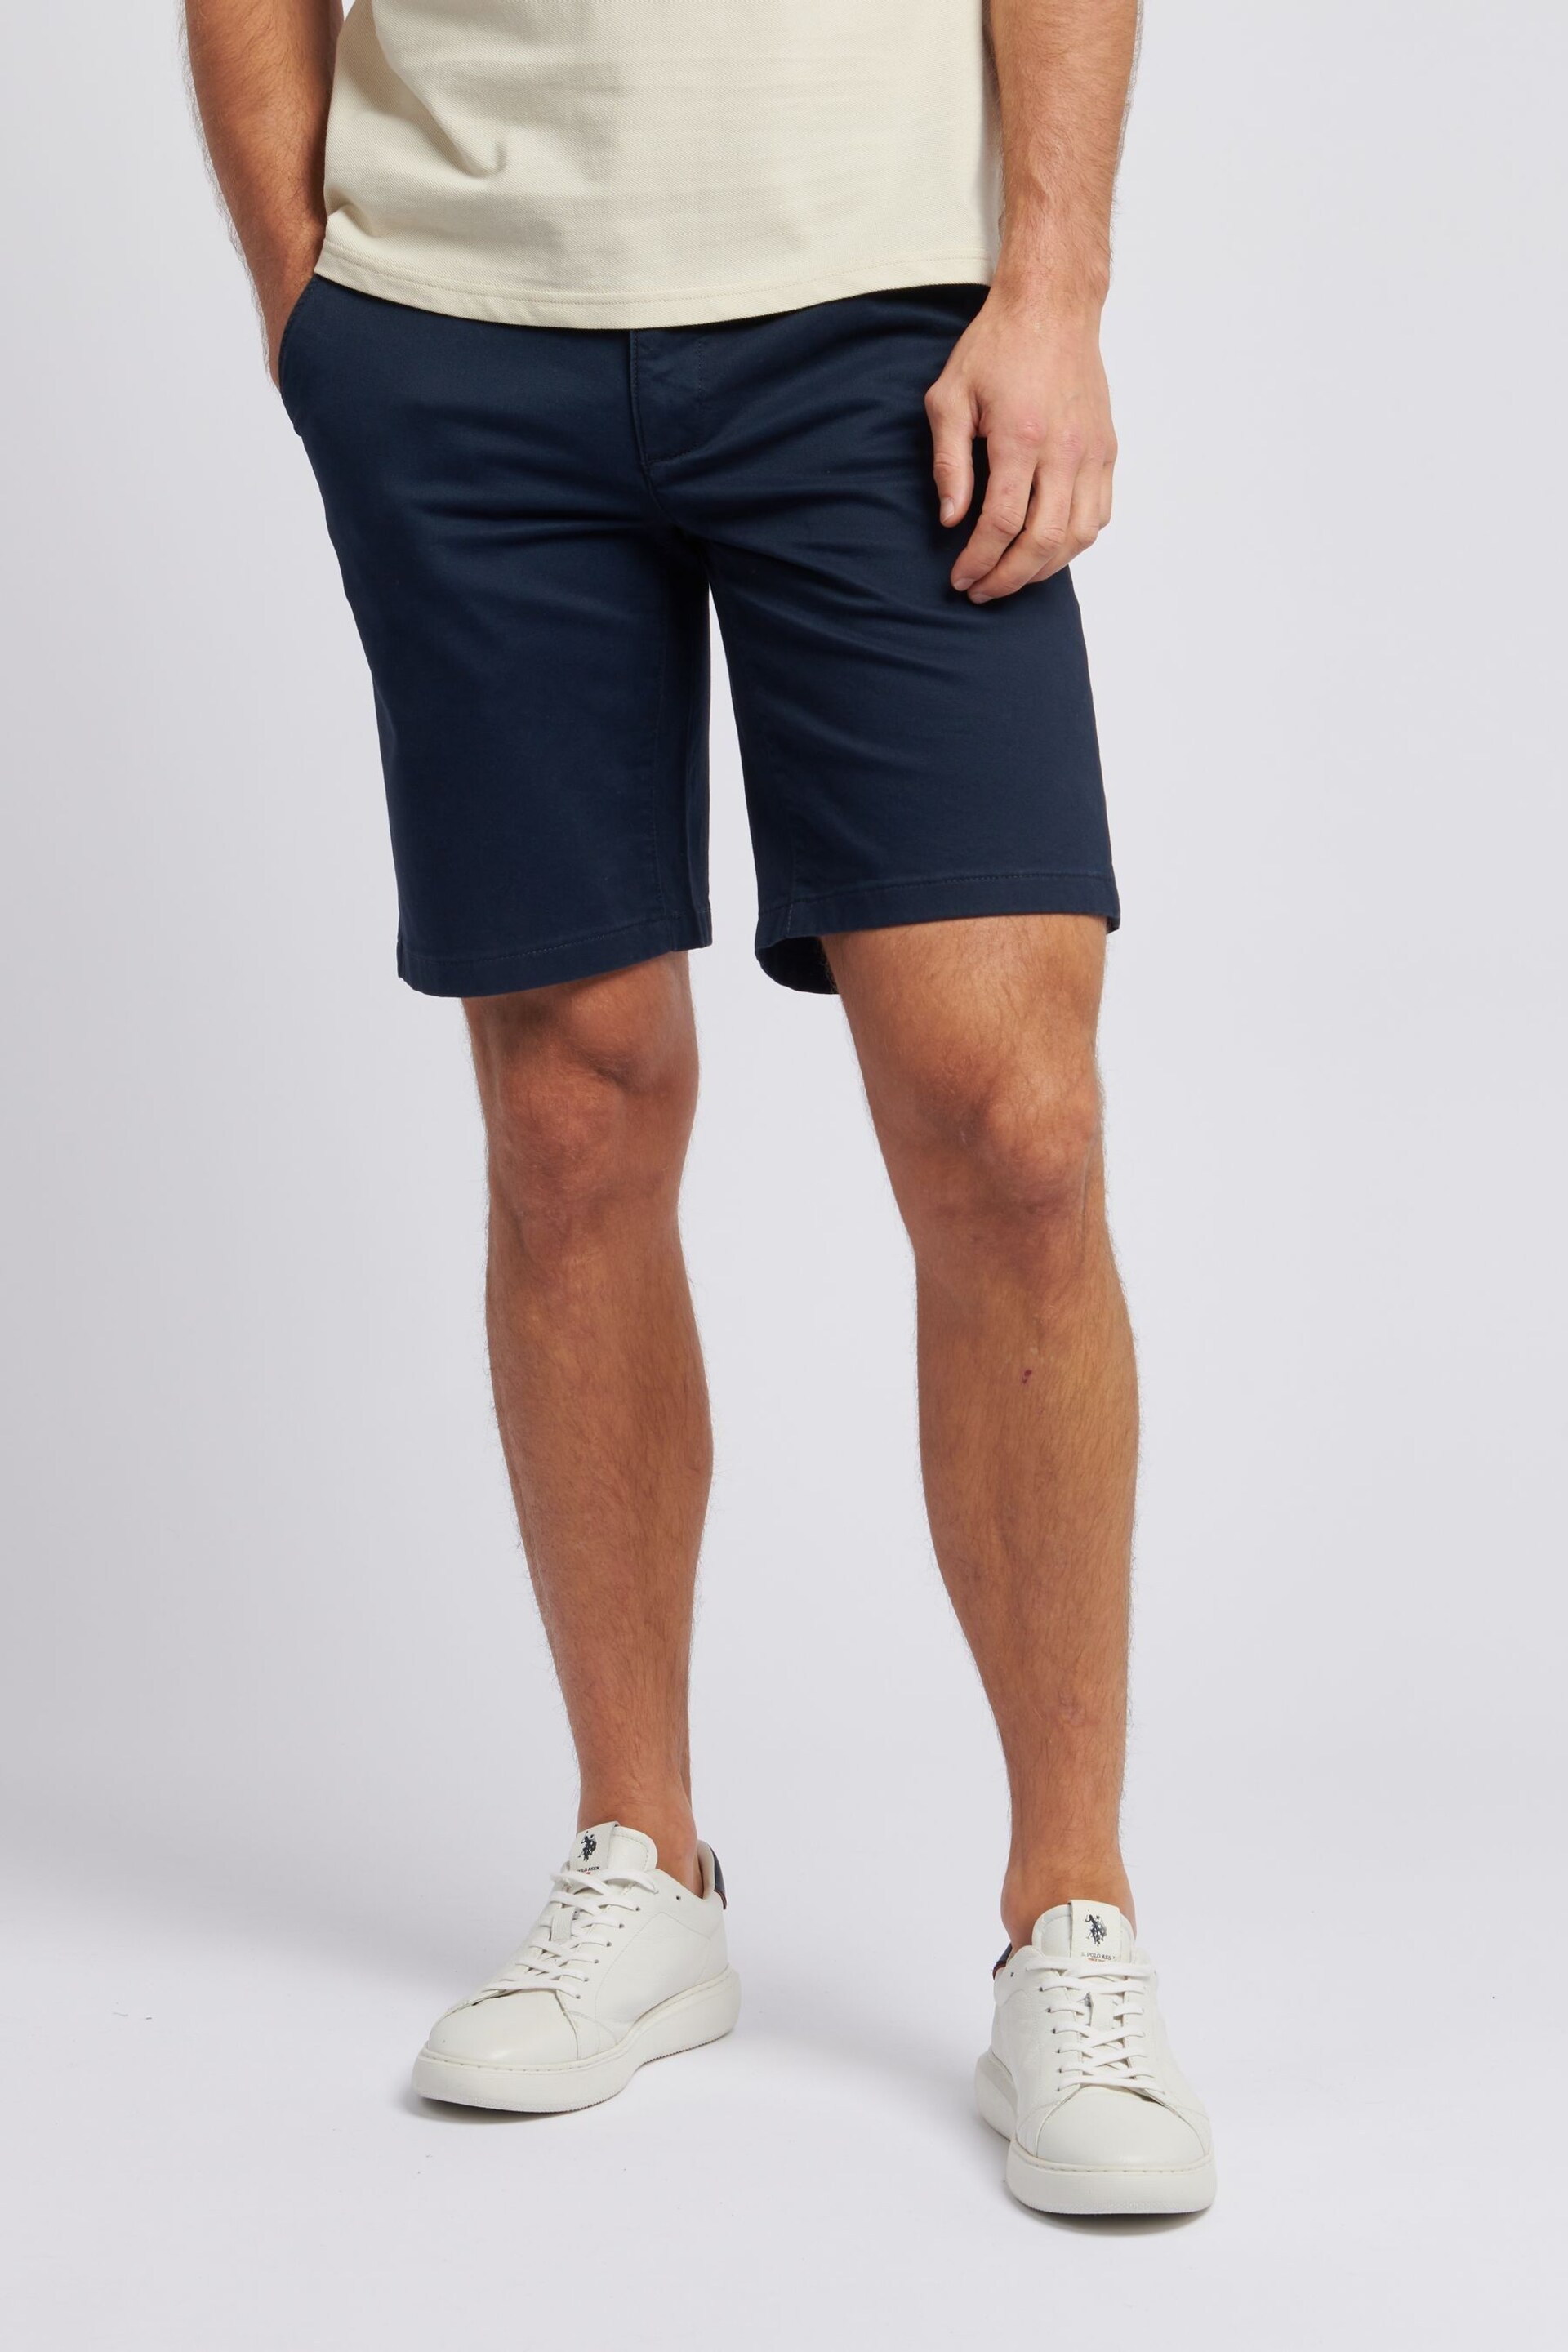 U.S. Polo Assn. Mens Classic Chinos Shorts - Image 1 of 8